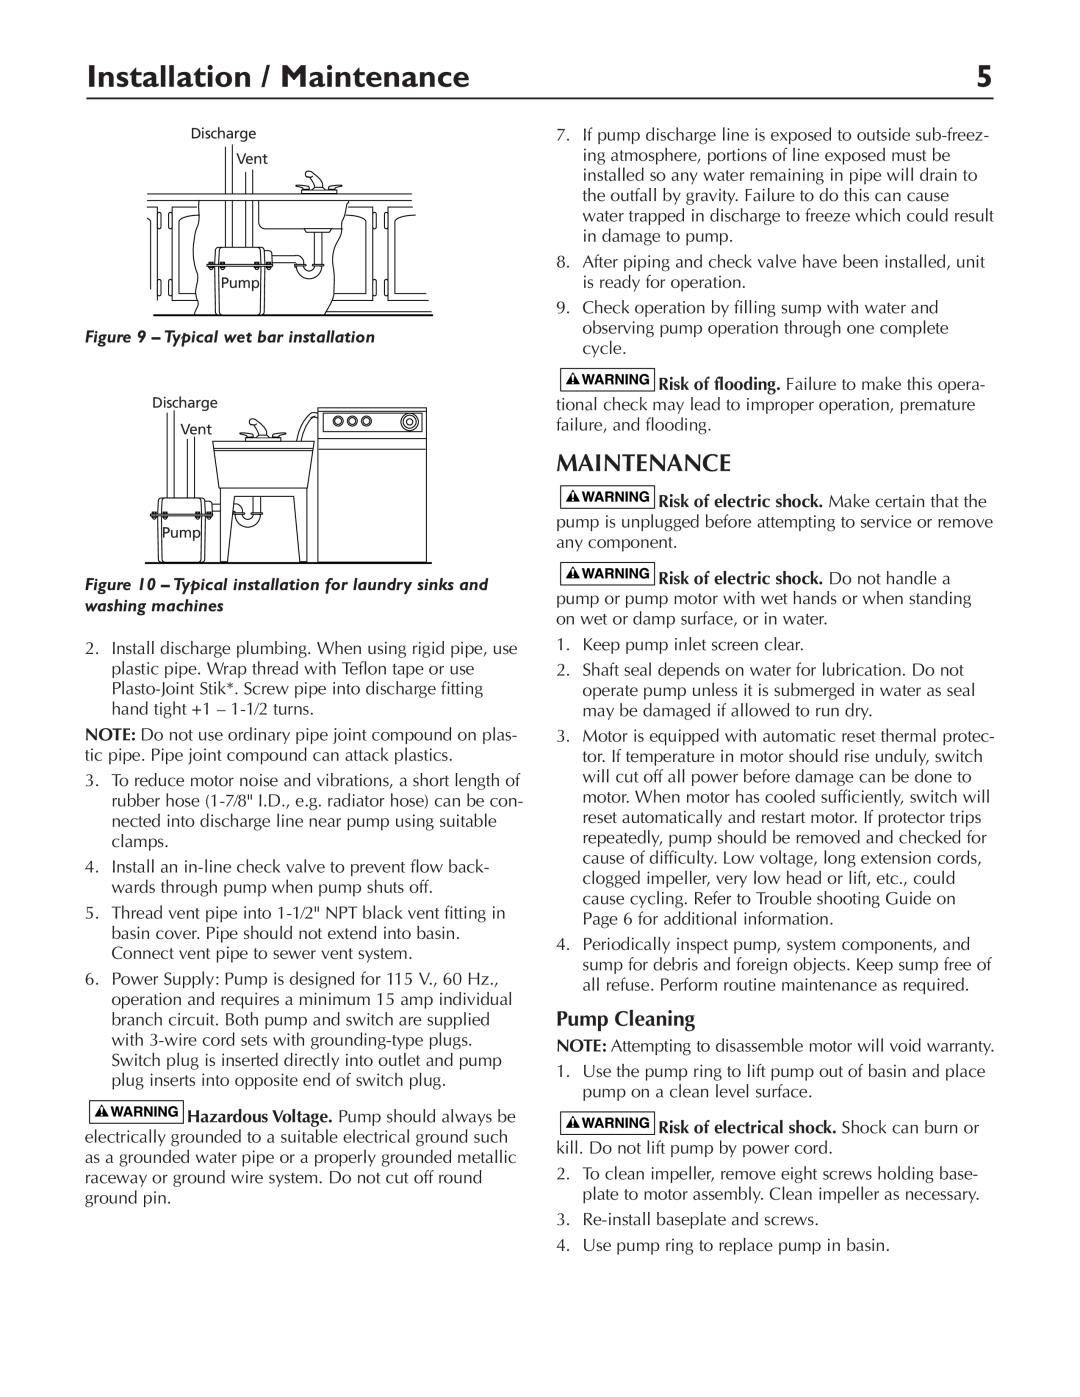 Pentair DP233110V owner manual Installation / Maintenance, Pump Cleaning, Typical wet bar installation 